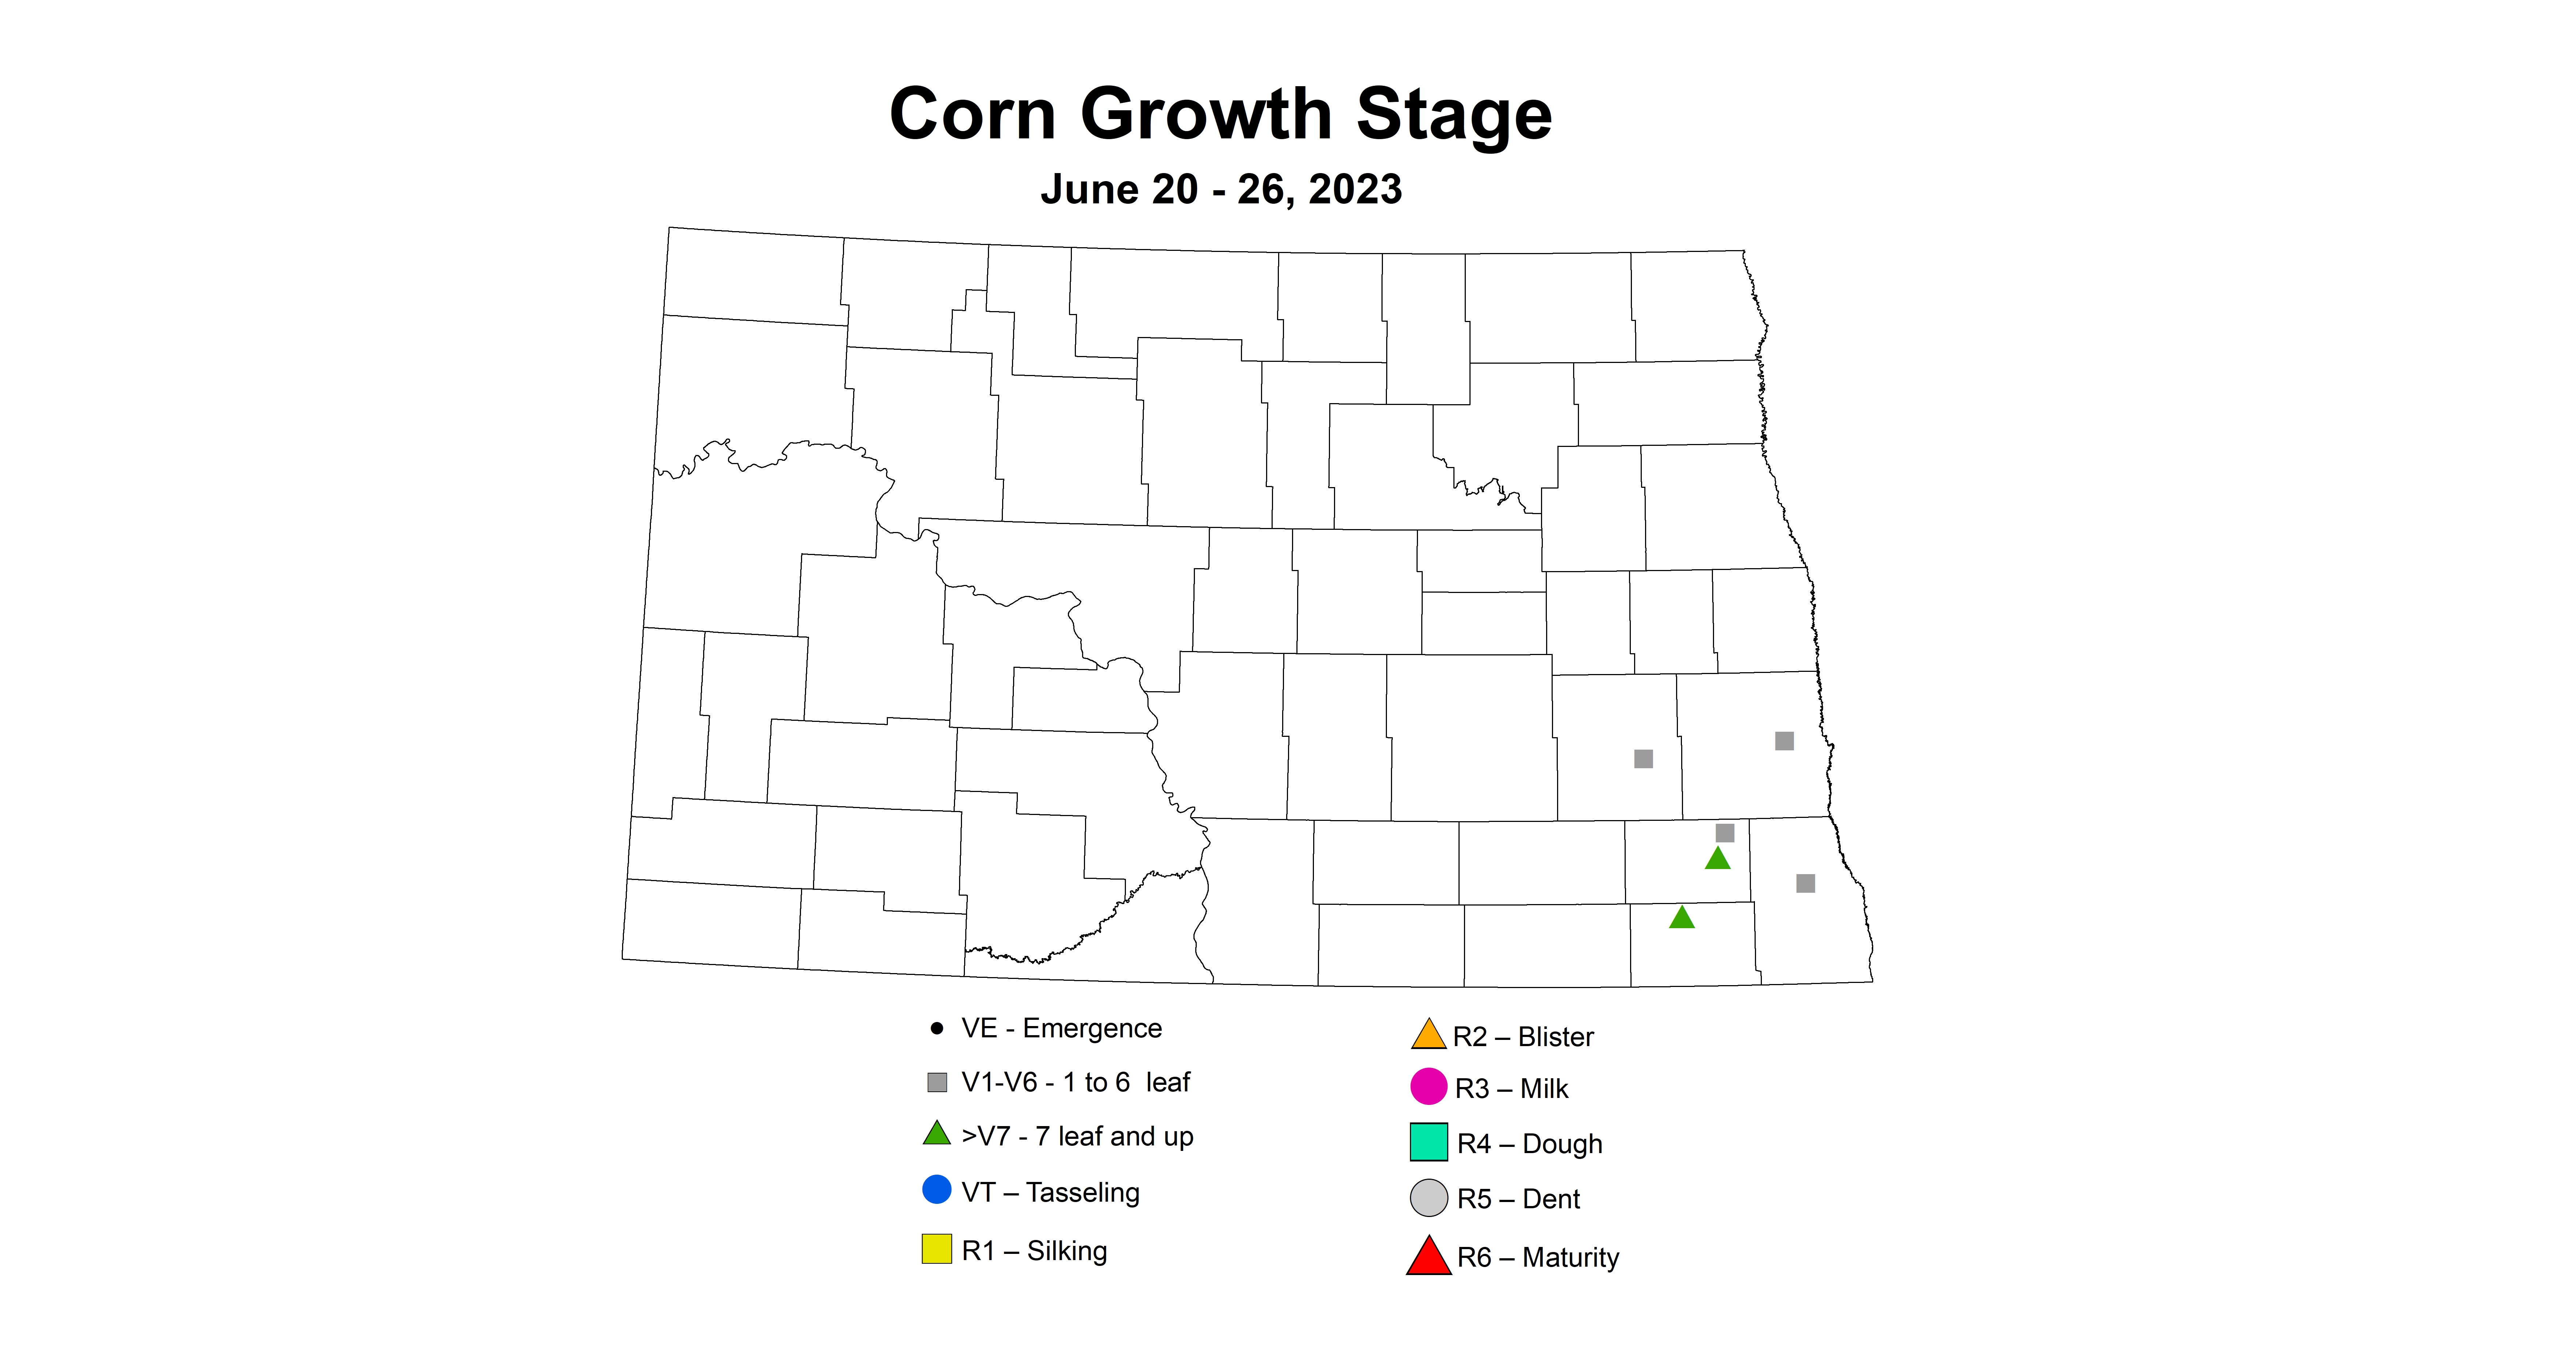 corn growth stages ecb 6.20-6.26 2023